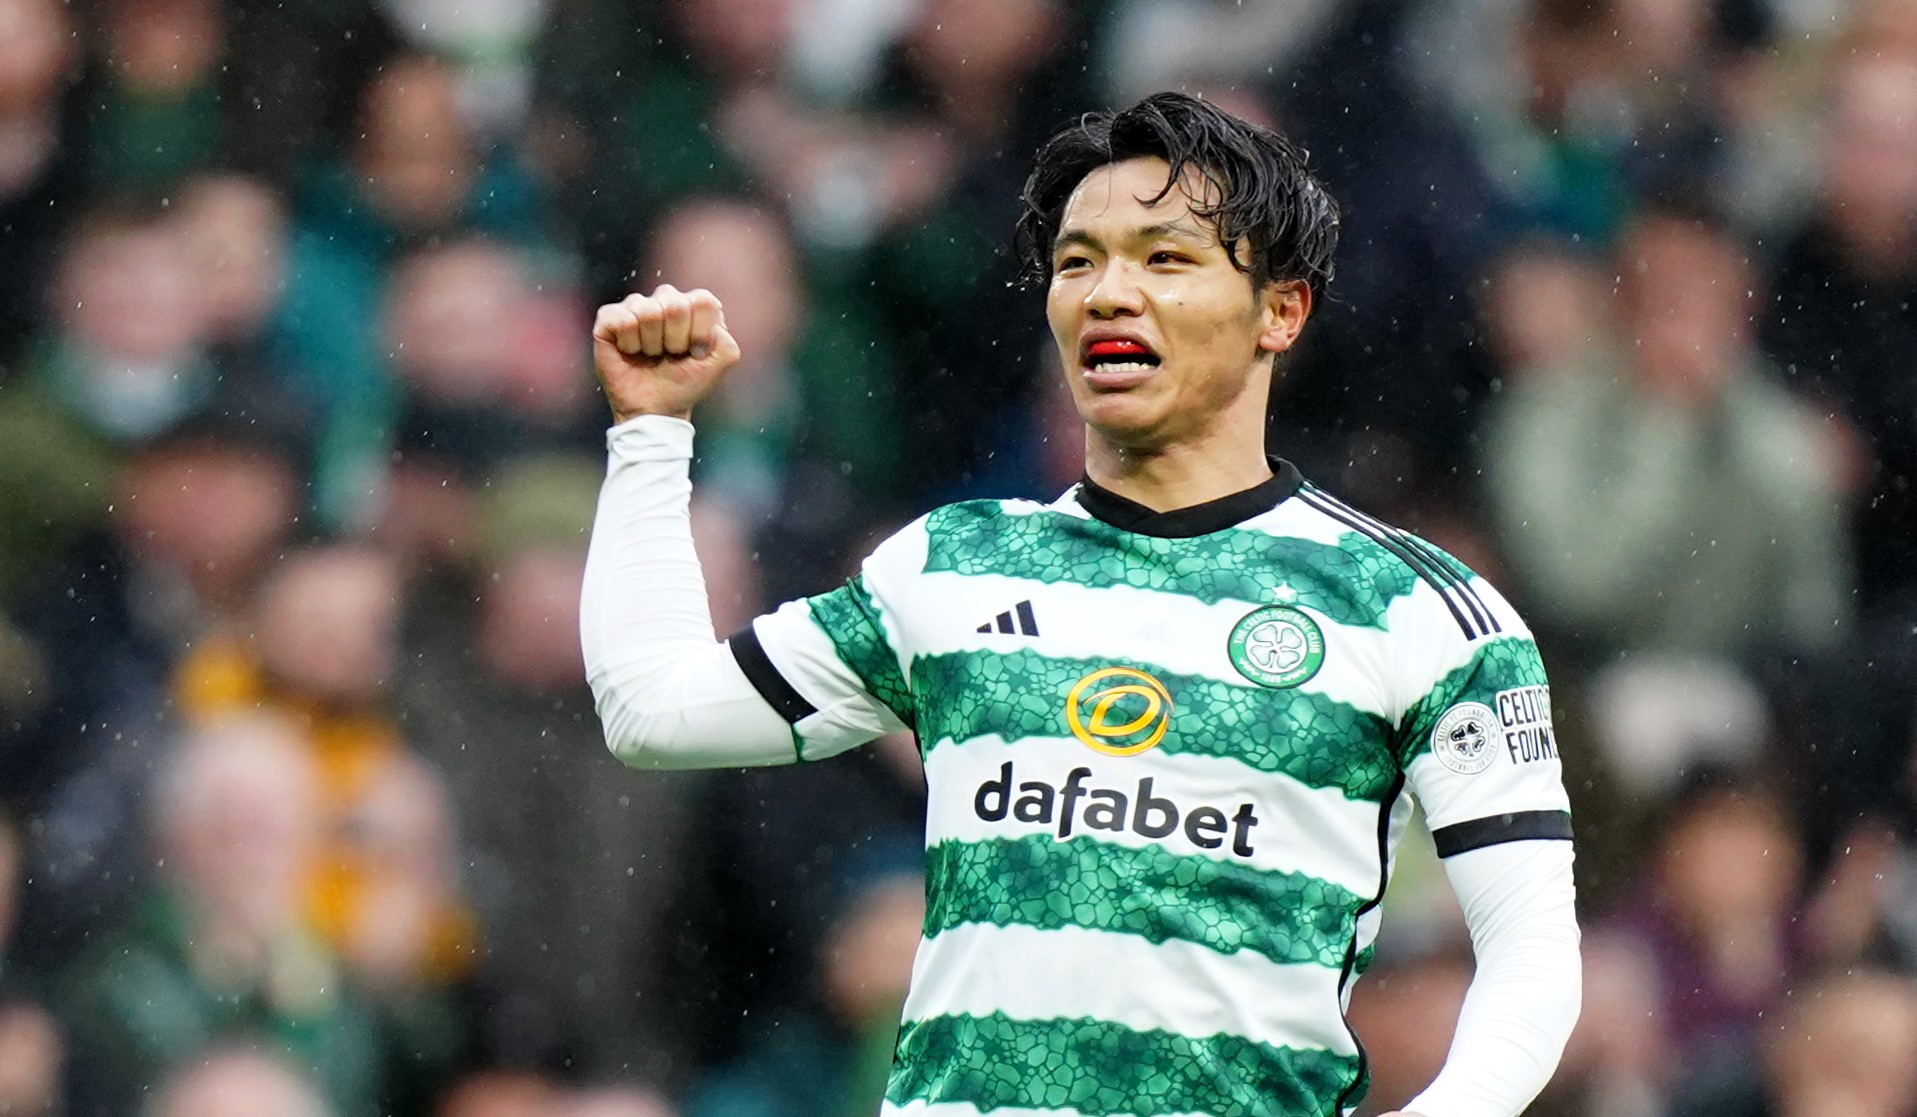 Celtic 3 Kilmarnock 1: Instant reaction to the burning issues